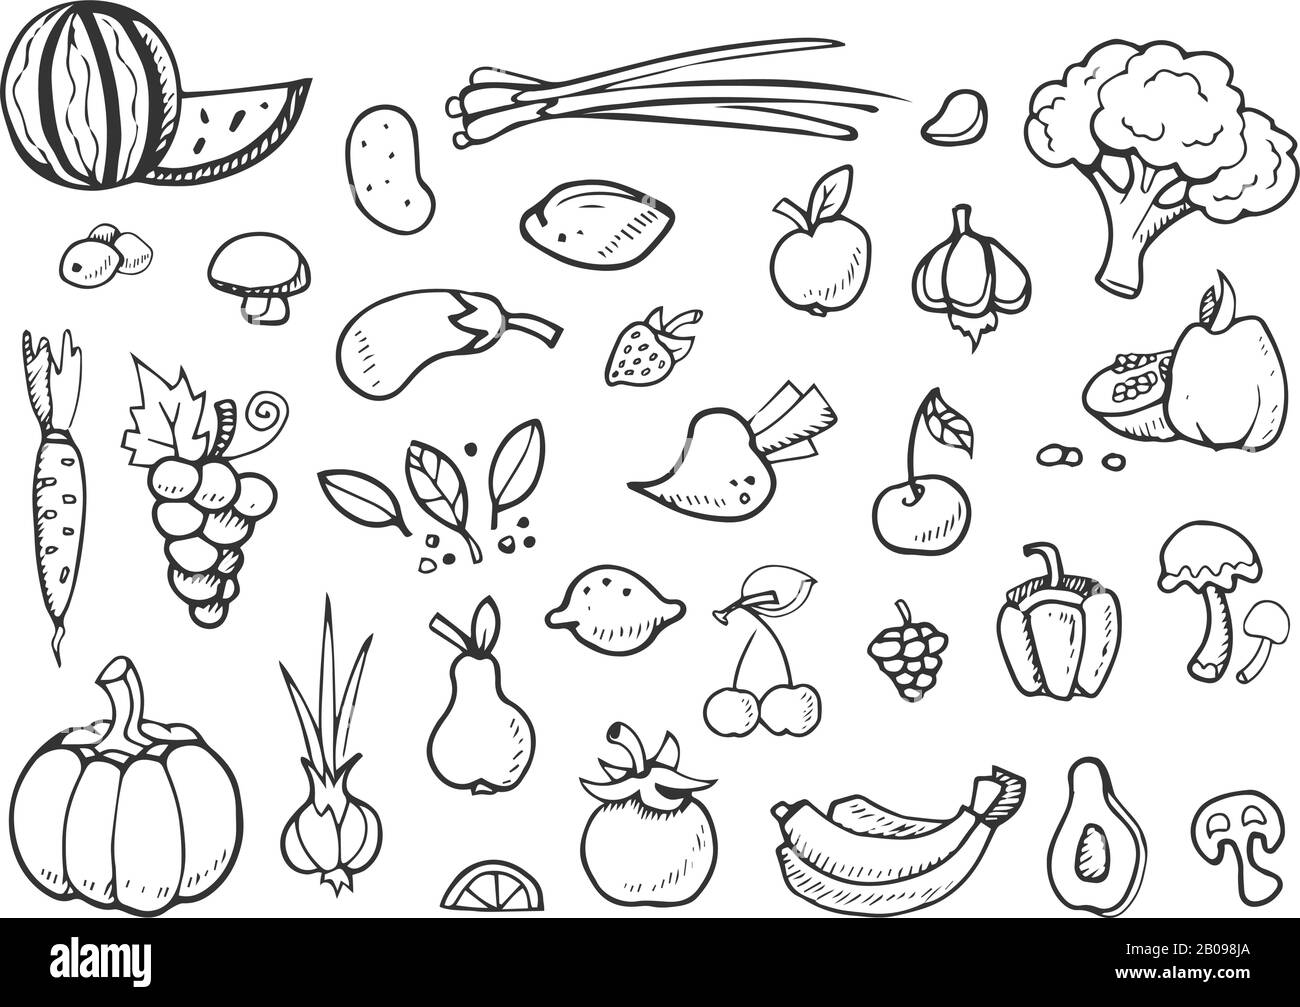 Fresh vegetables and fruit vector doodle icons. healthy eating hand drawn menu elements. Vegetarian healthy food, sketch of food for menu illustration Stock Vector